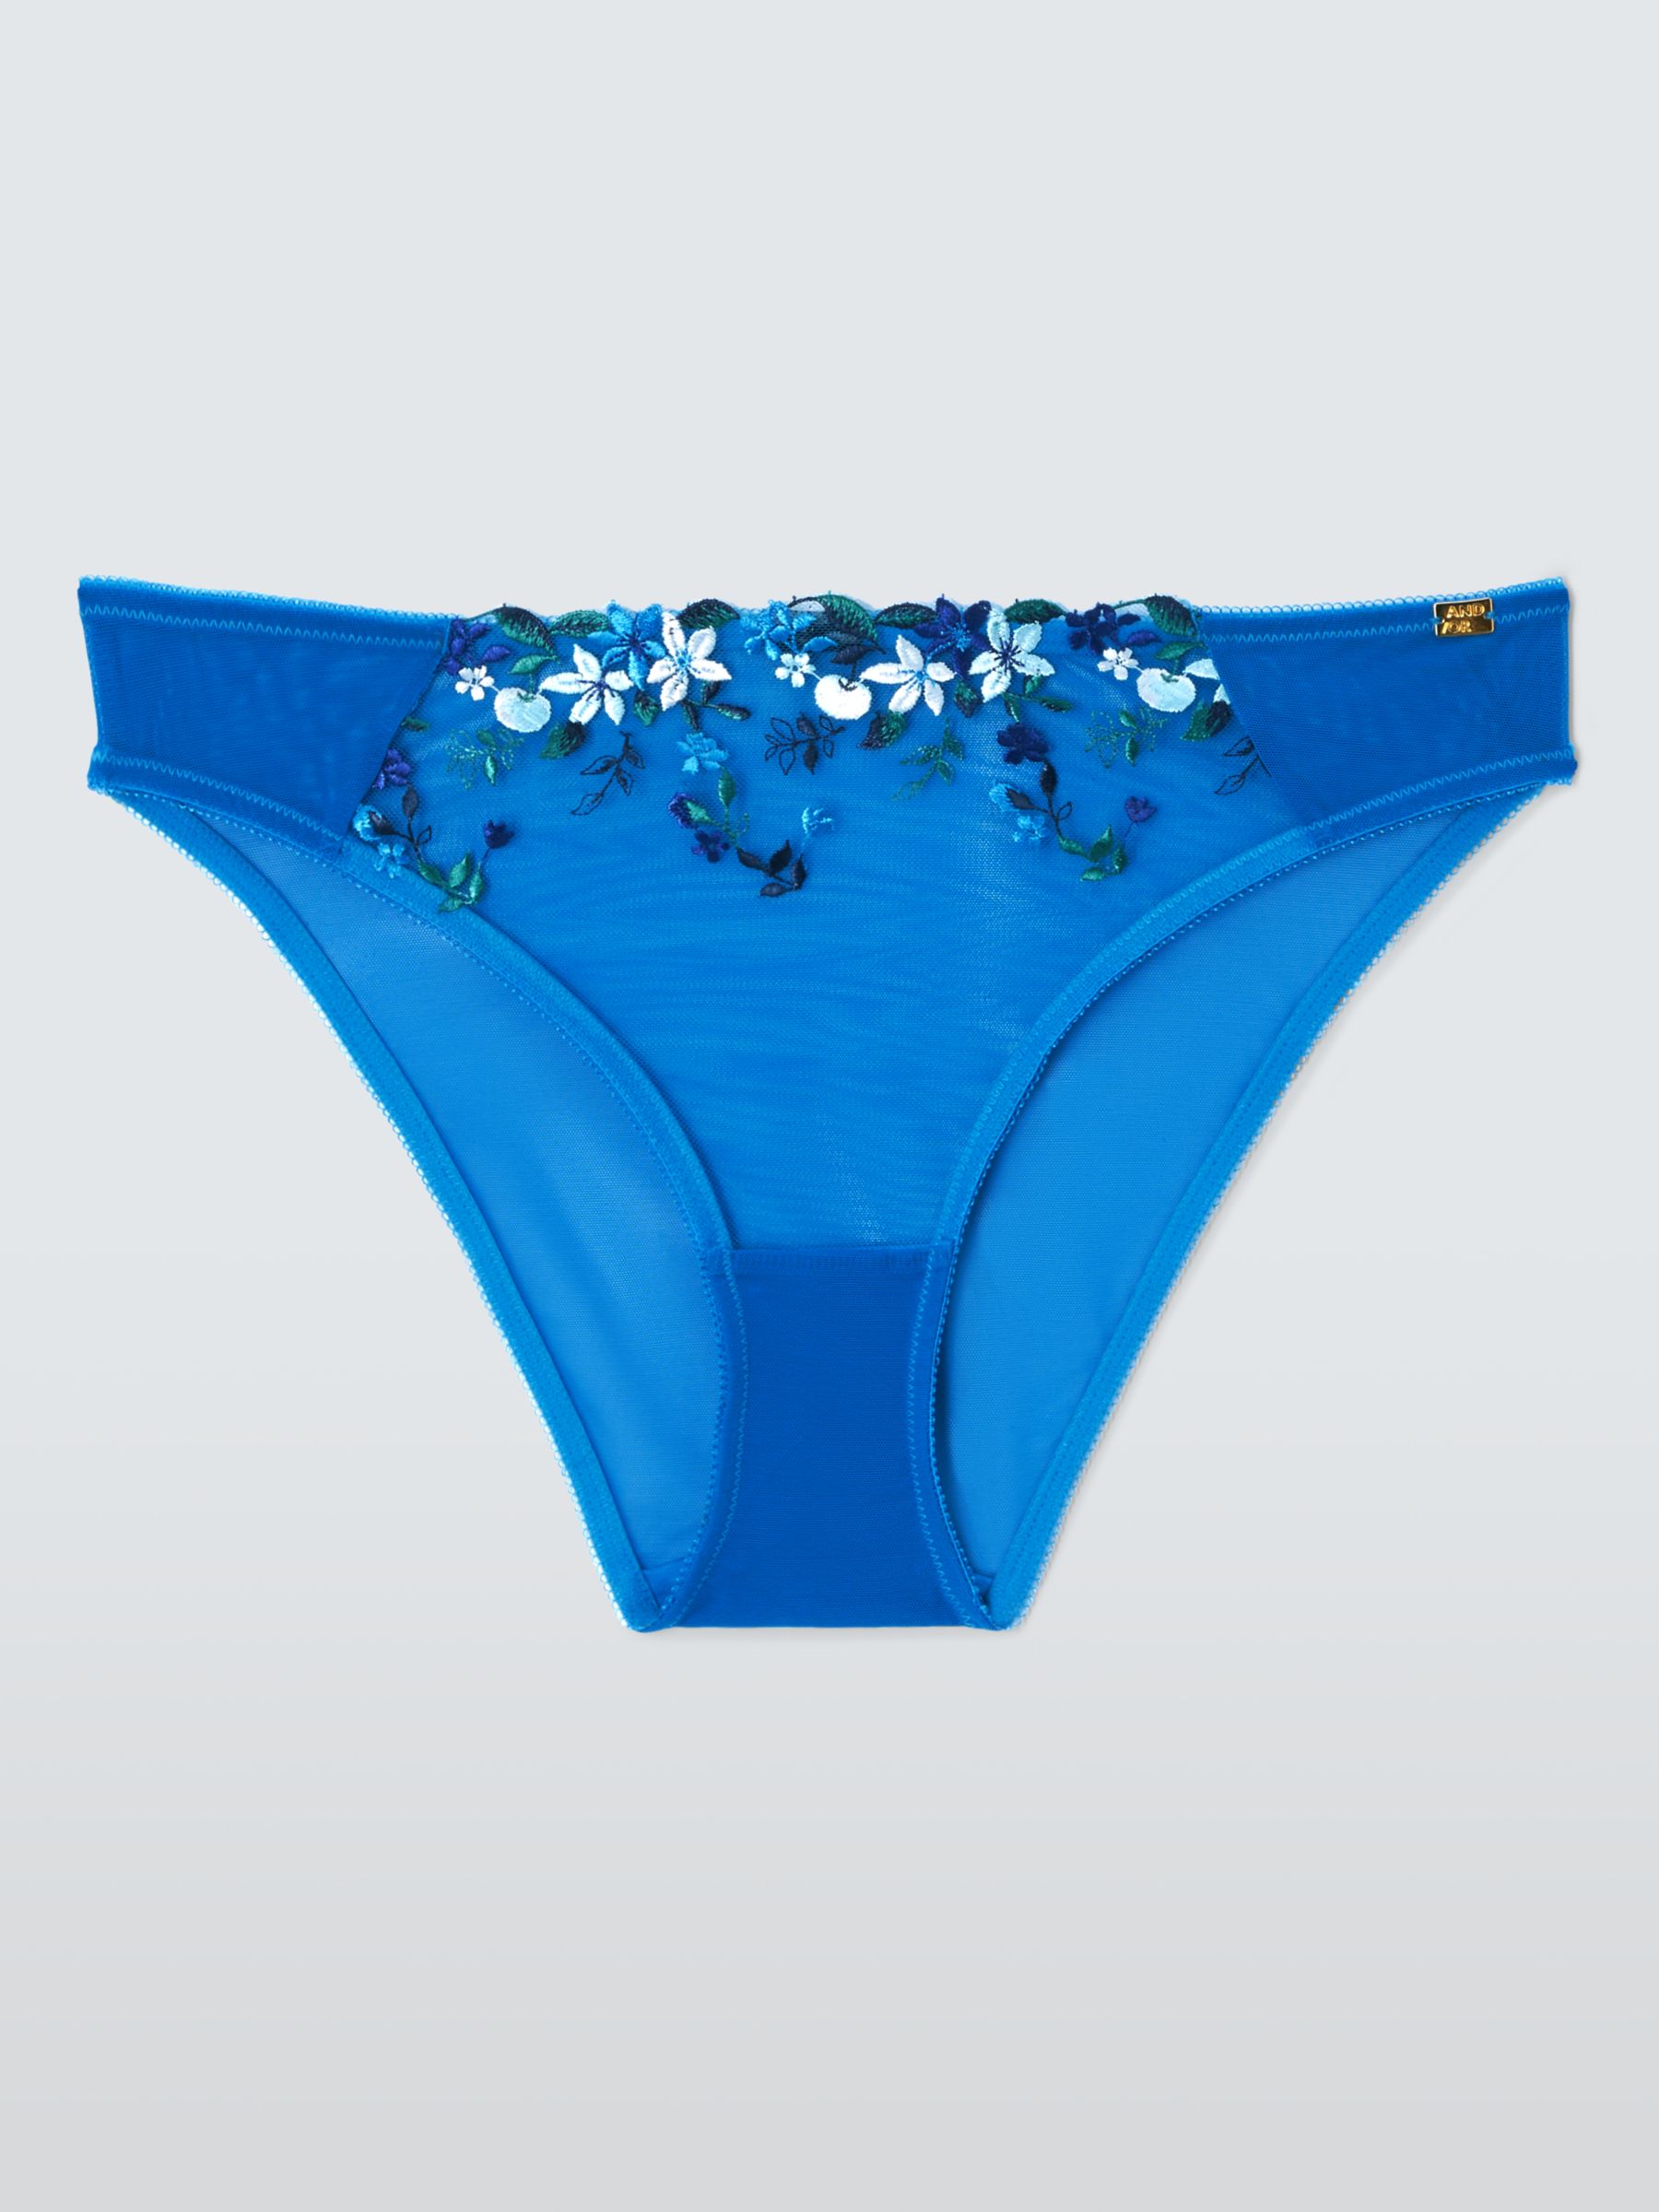 AND/OR Kiki Floral Embroidery Knickers, Light Blue, 16